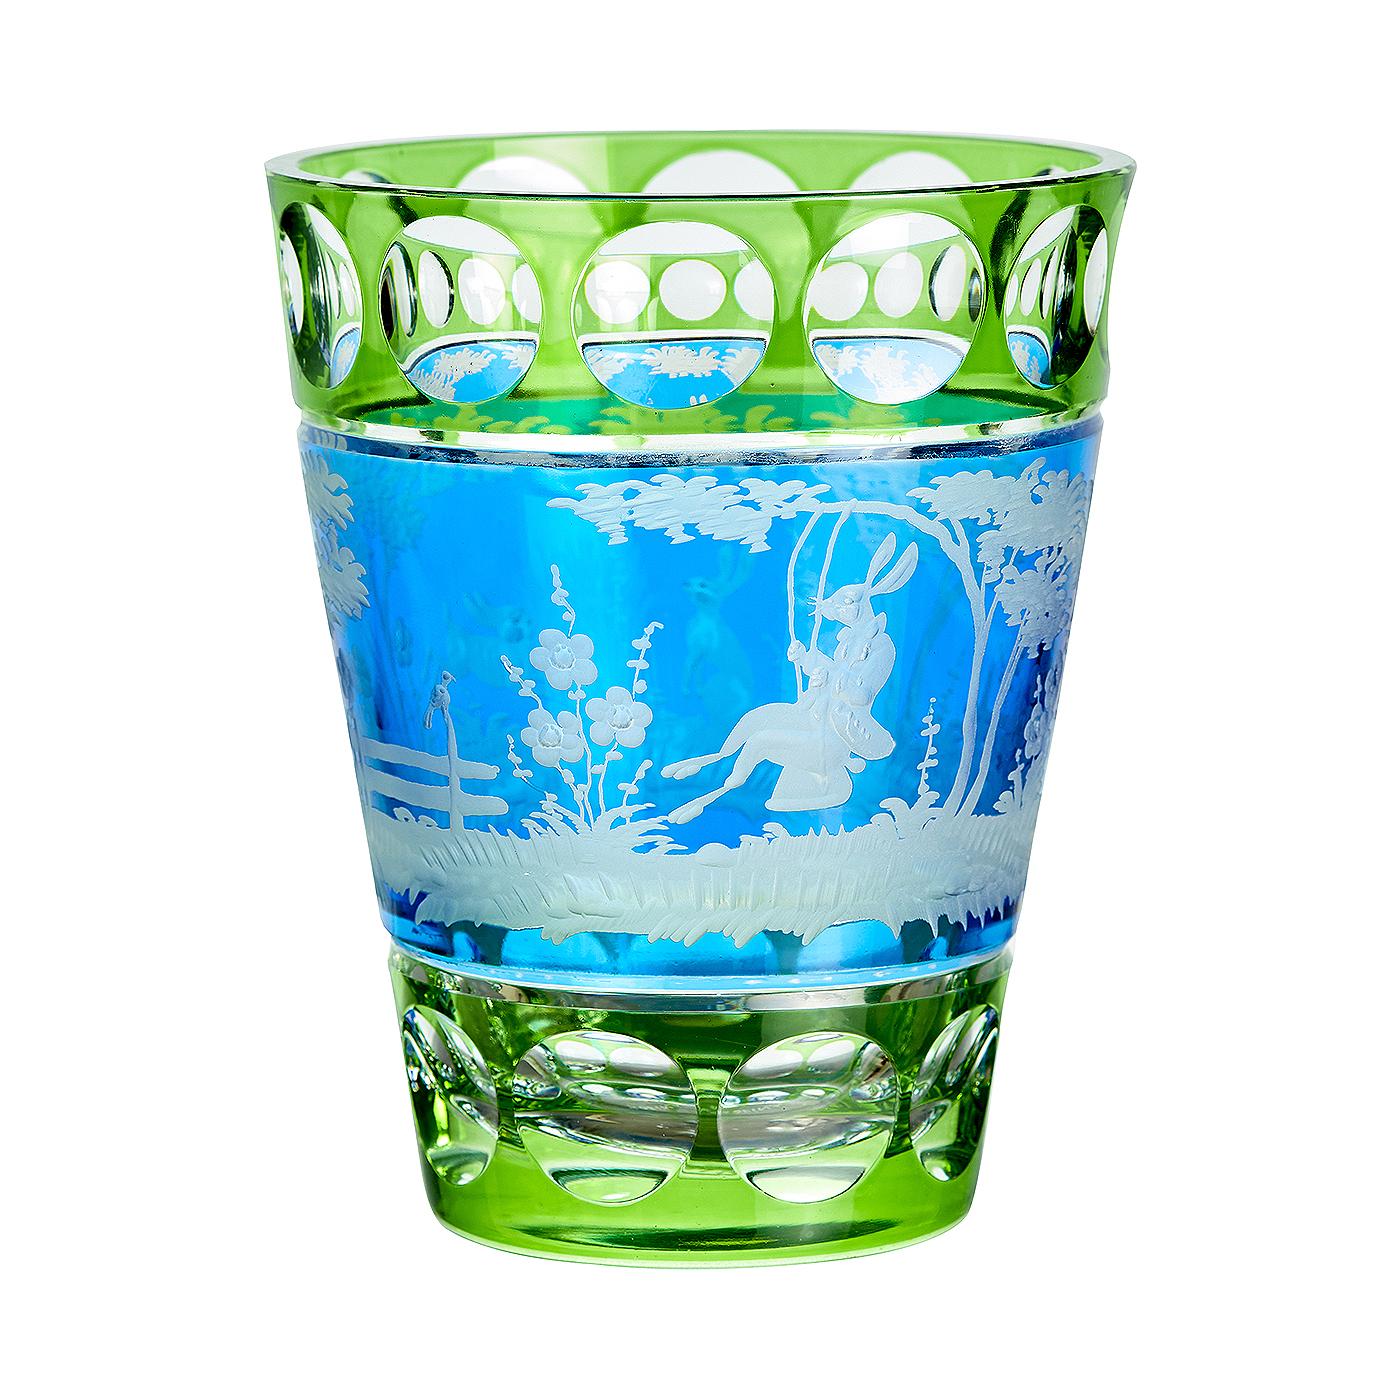 Hand blown crystal vase in green and blue glass with a vintage Eastern scene. The decor is an Easter decor with 2 hands-free engraved bunnies in naturalistic style. Completely hand blown and hand-engraved in Bavaria/Germany. The glass here shown